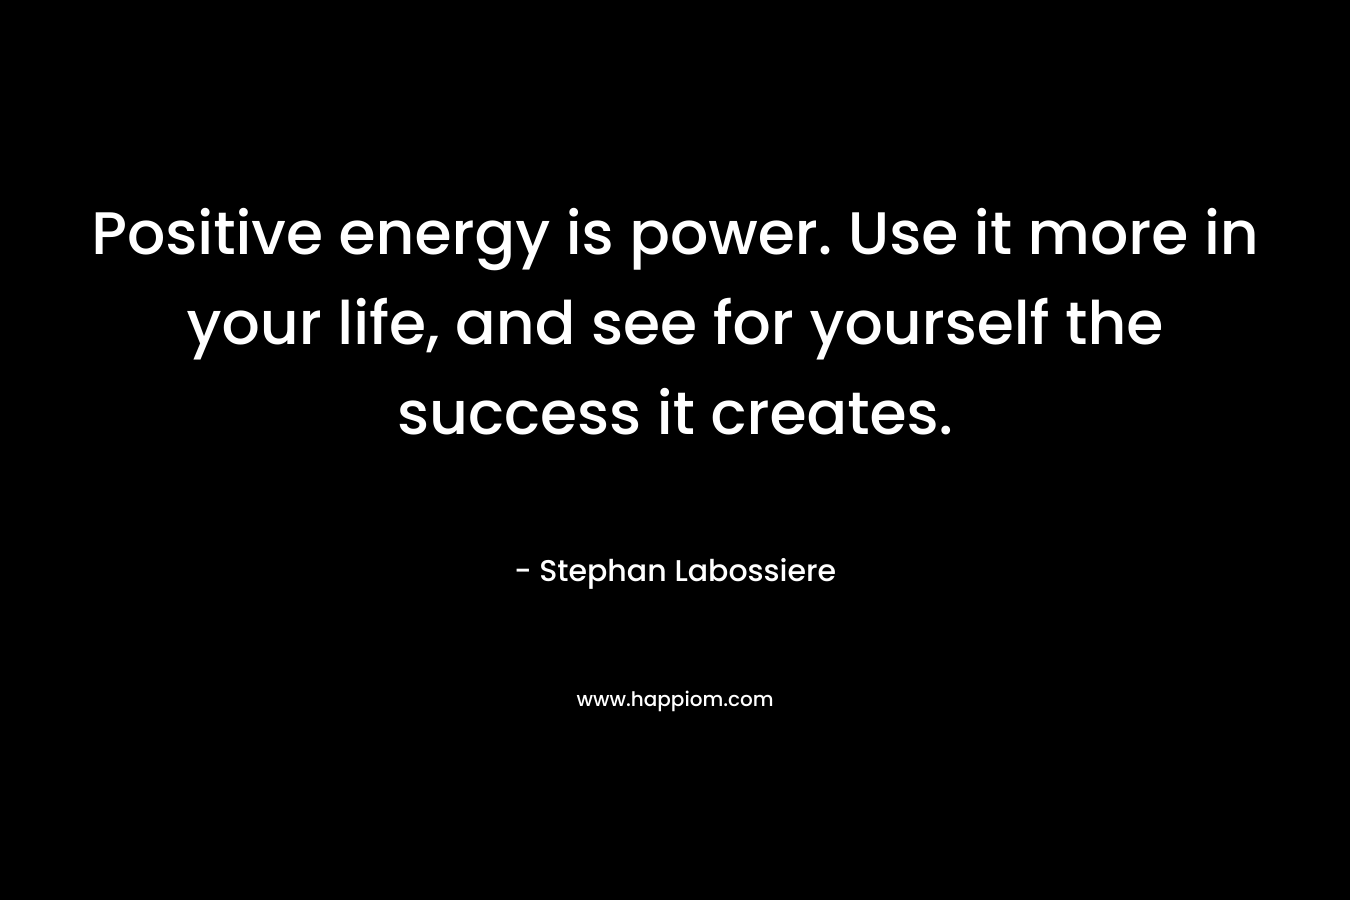 Positive energy is power. Use it more in your life, and see for yourself the success it creates.